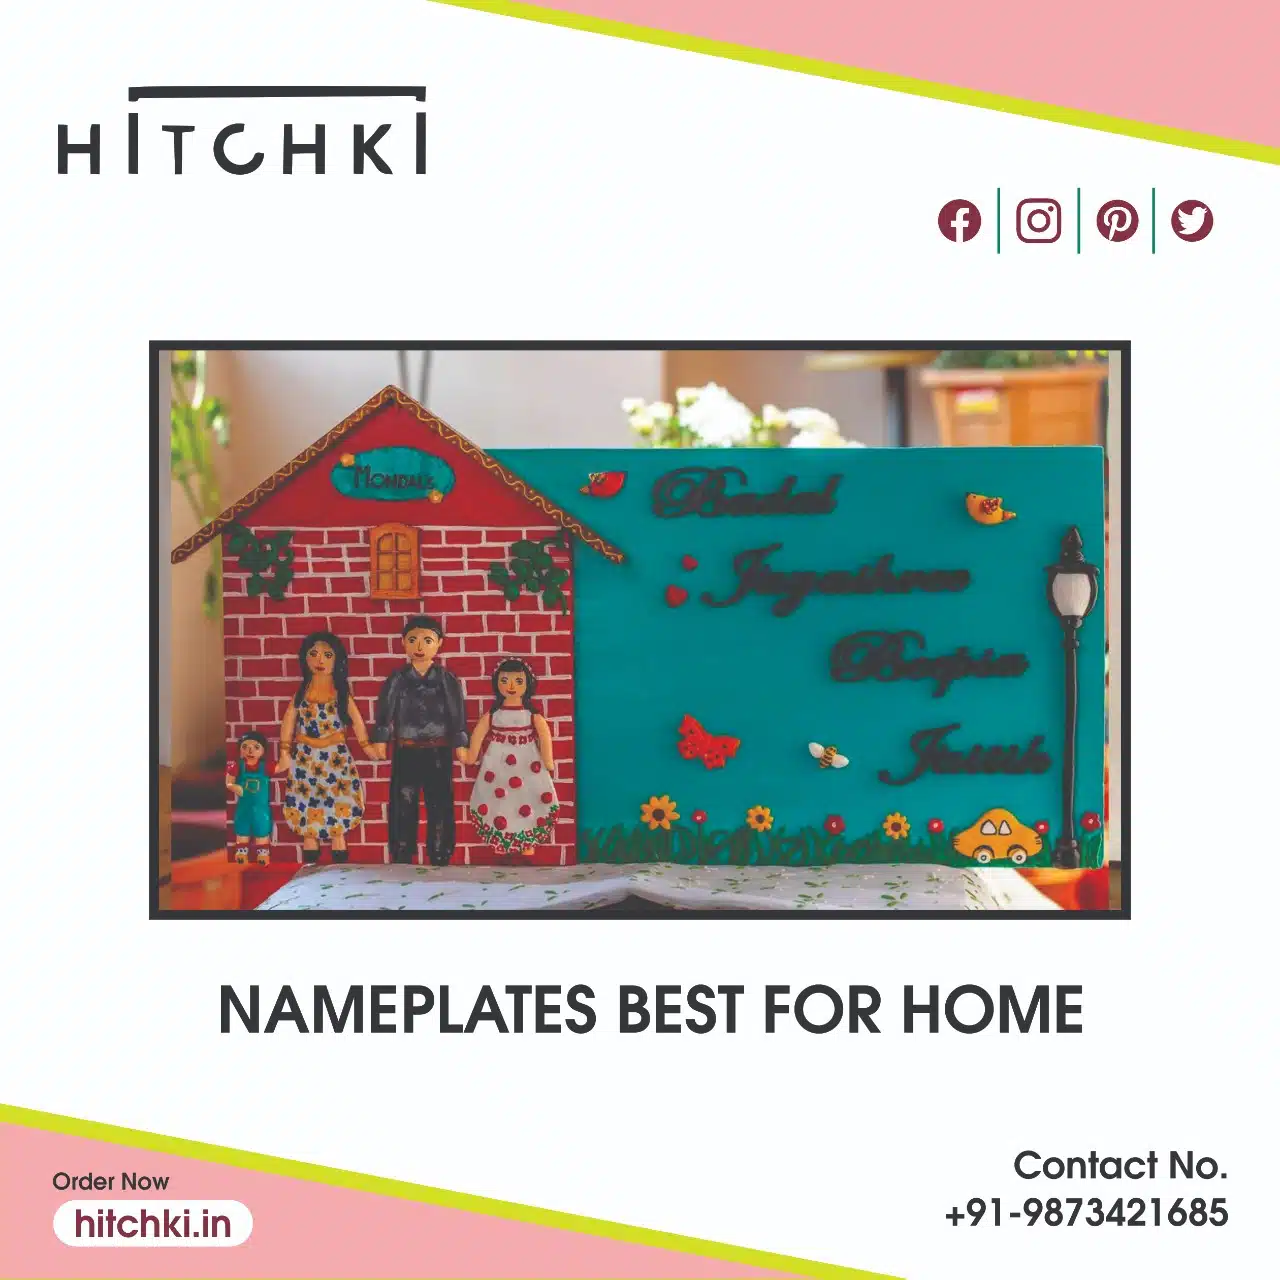 Nameplates best for home